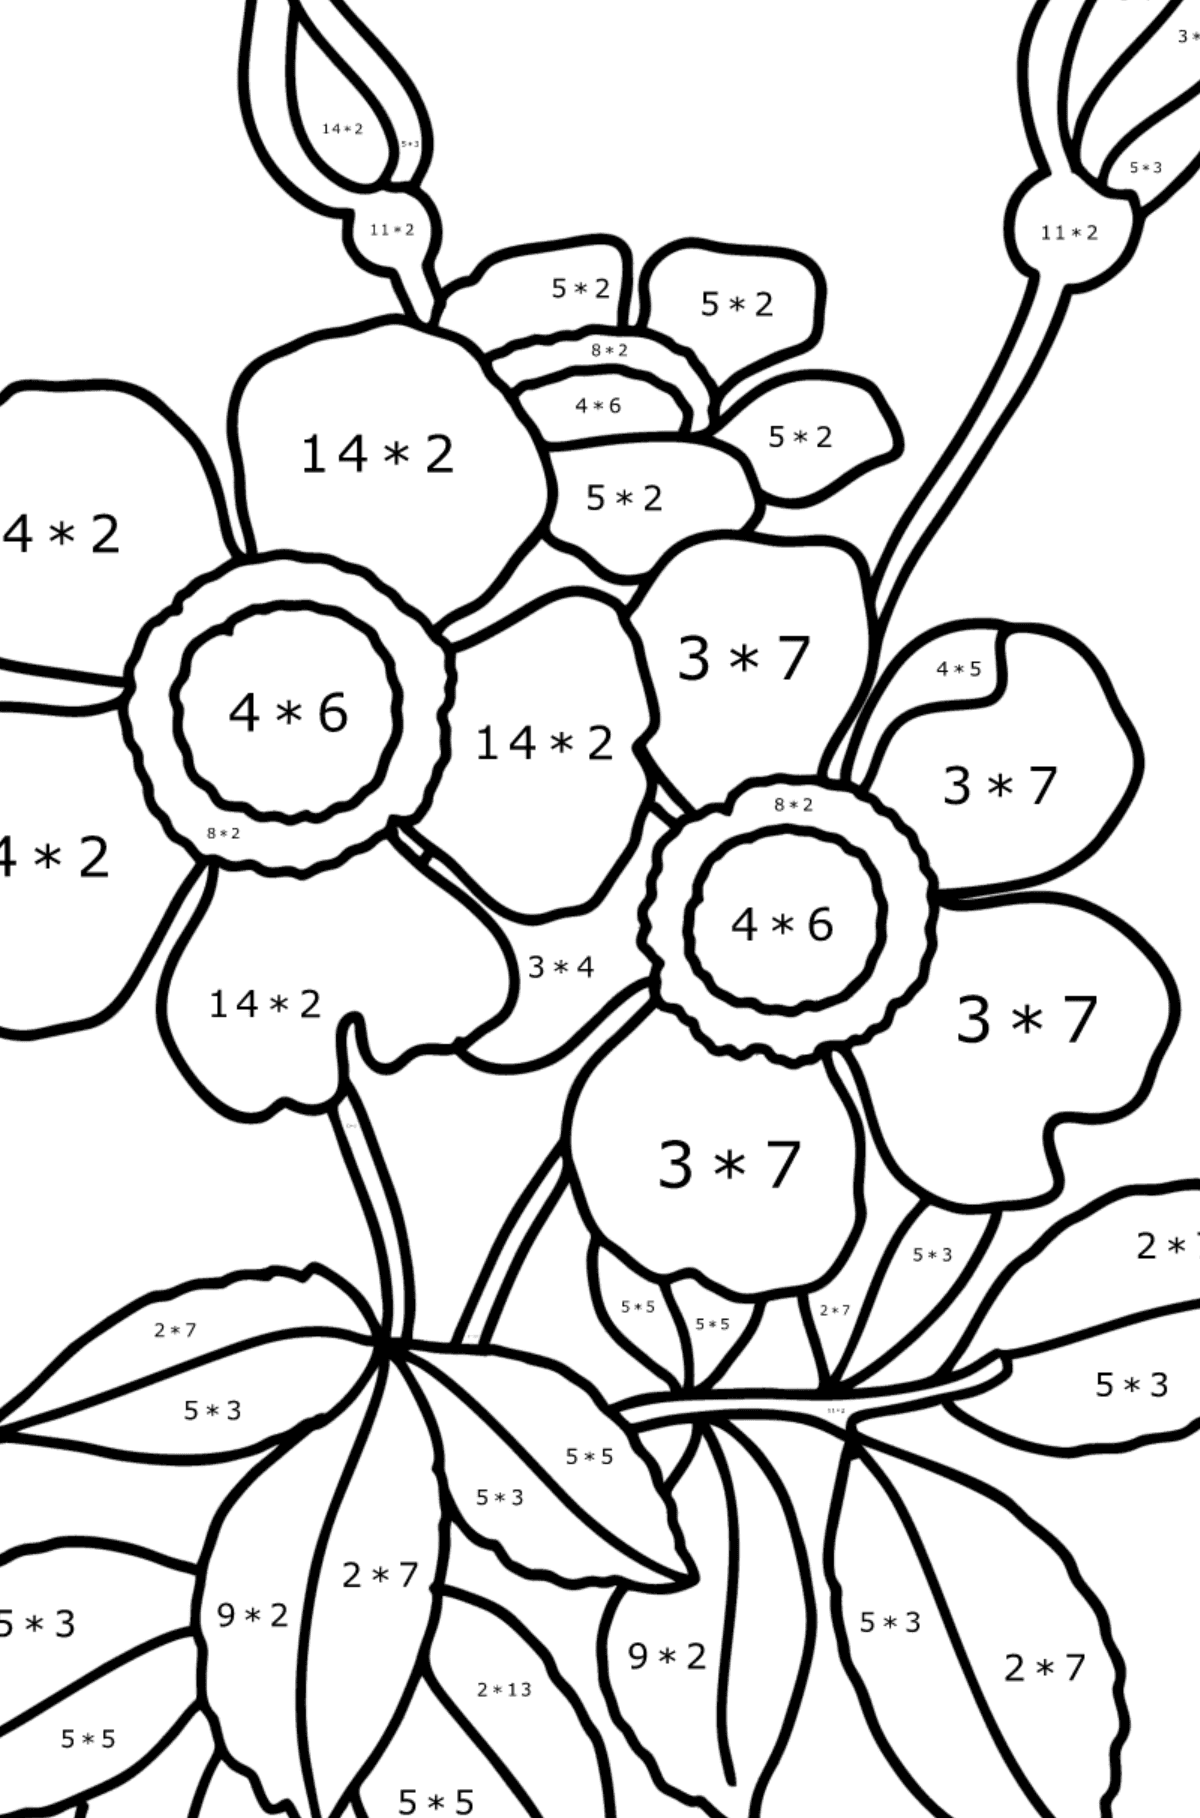 Spray rose coloring page - Math Coloring - Multiplication for Kids